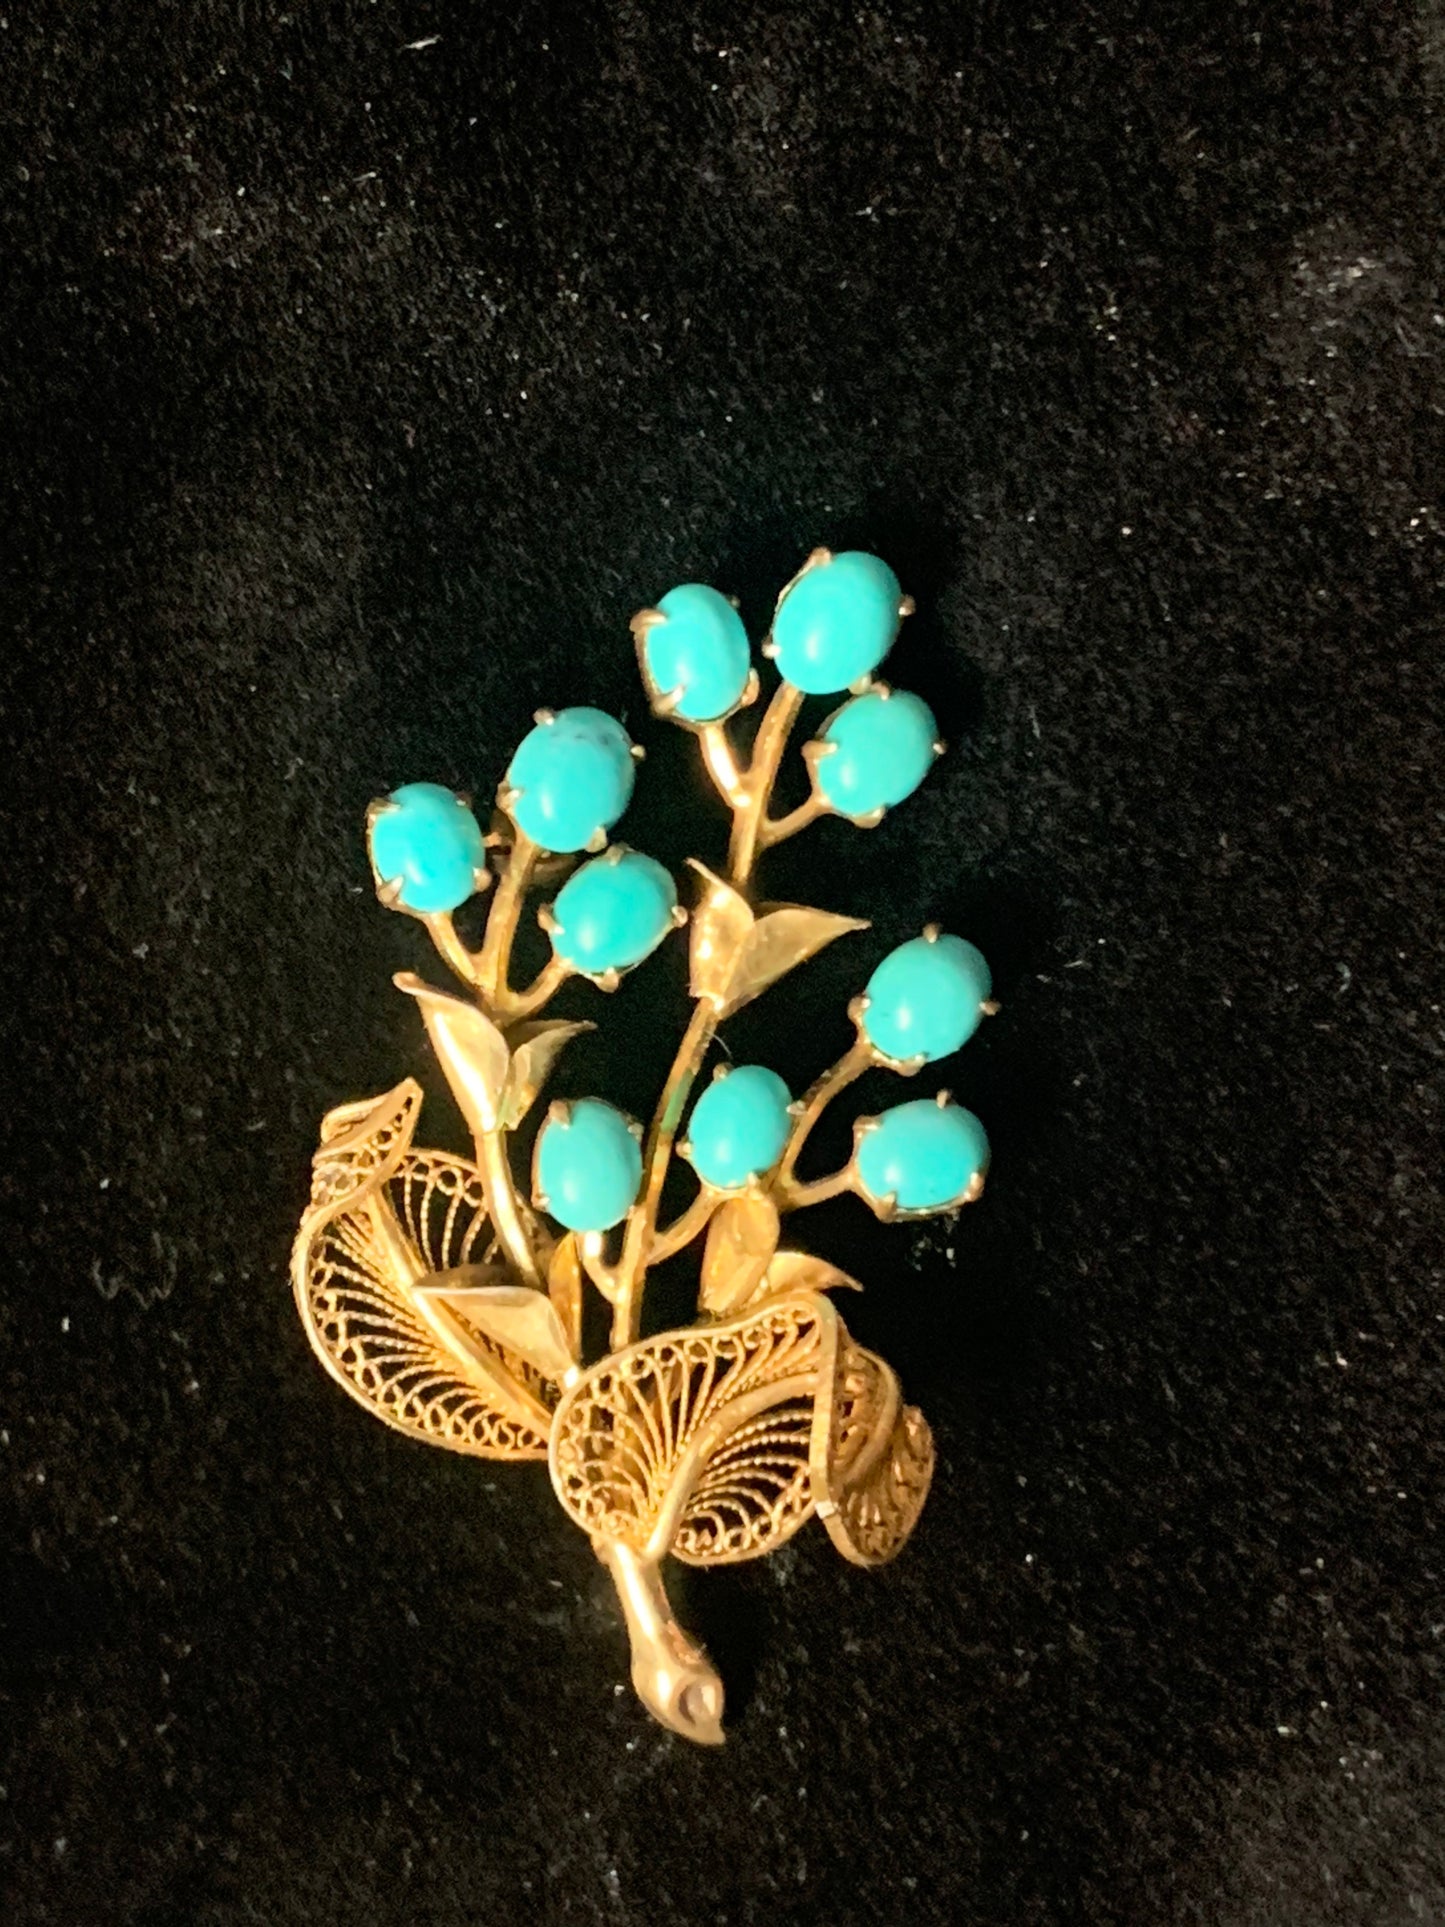 A turquoise brooch